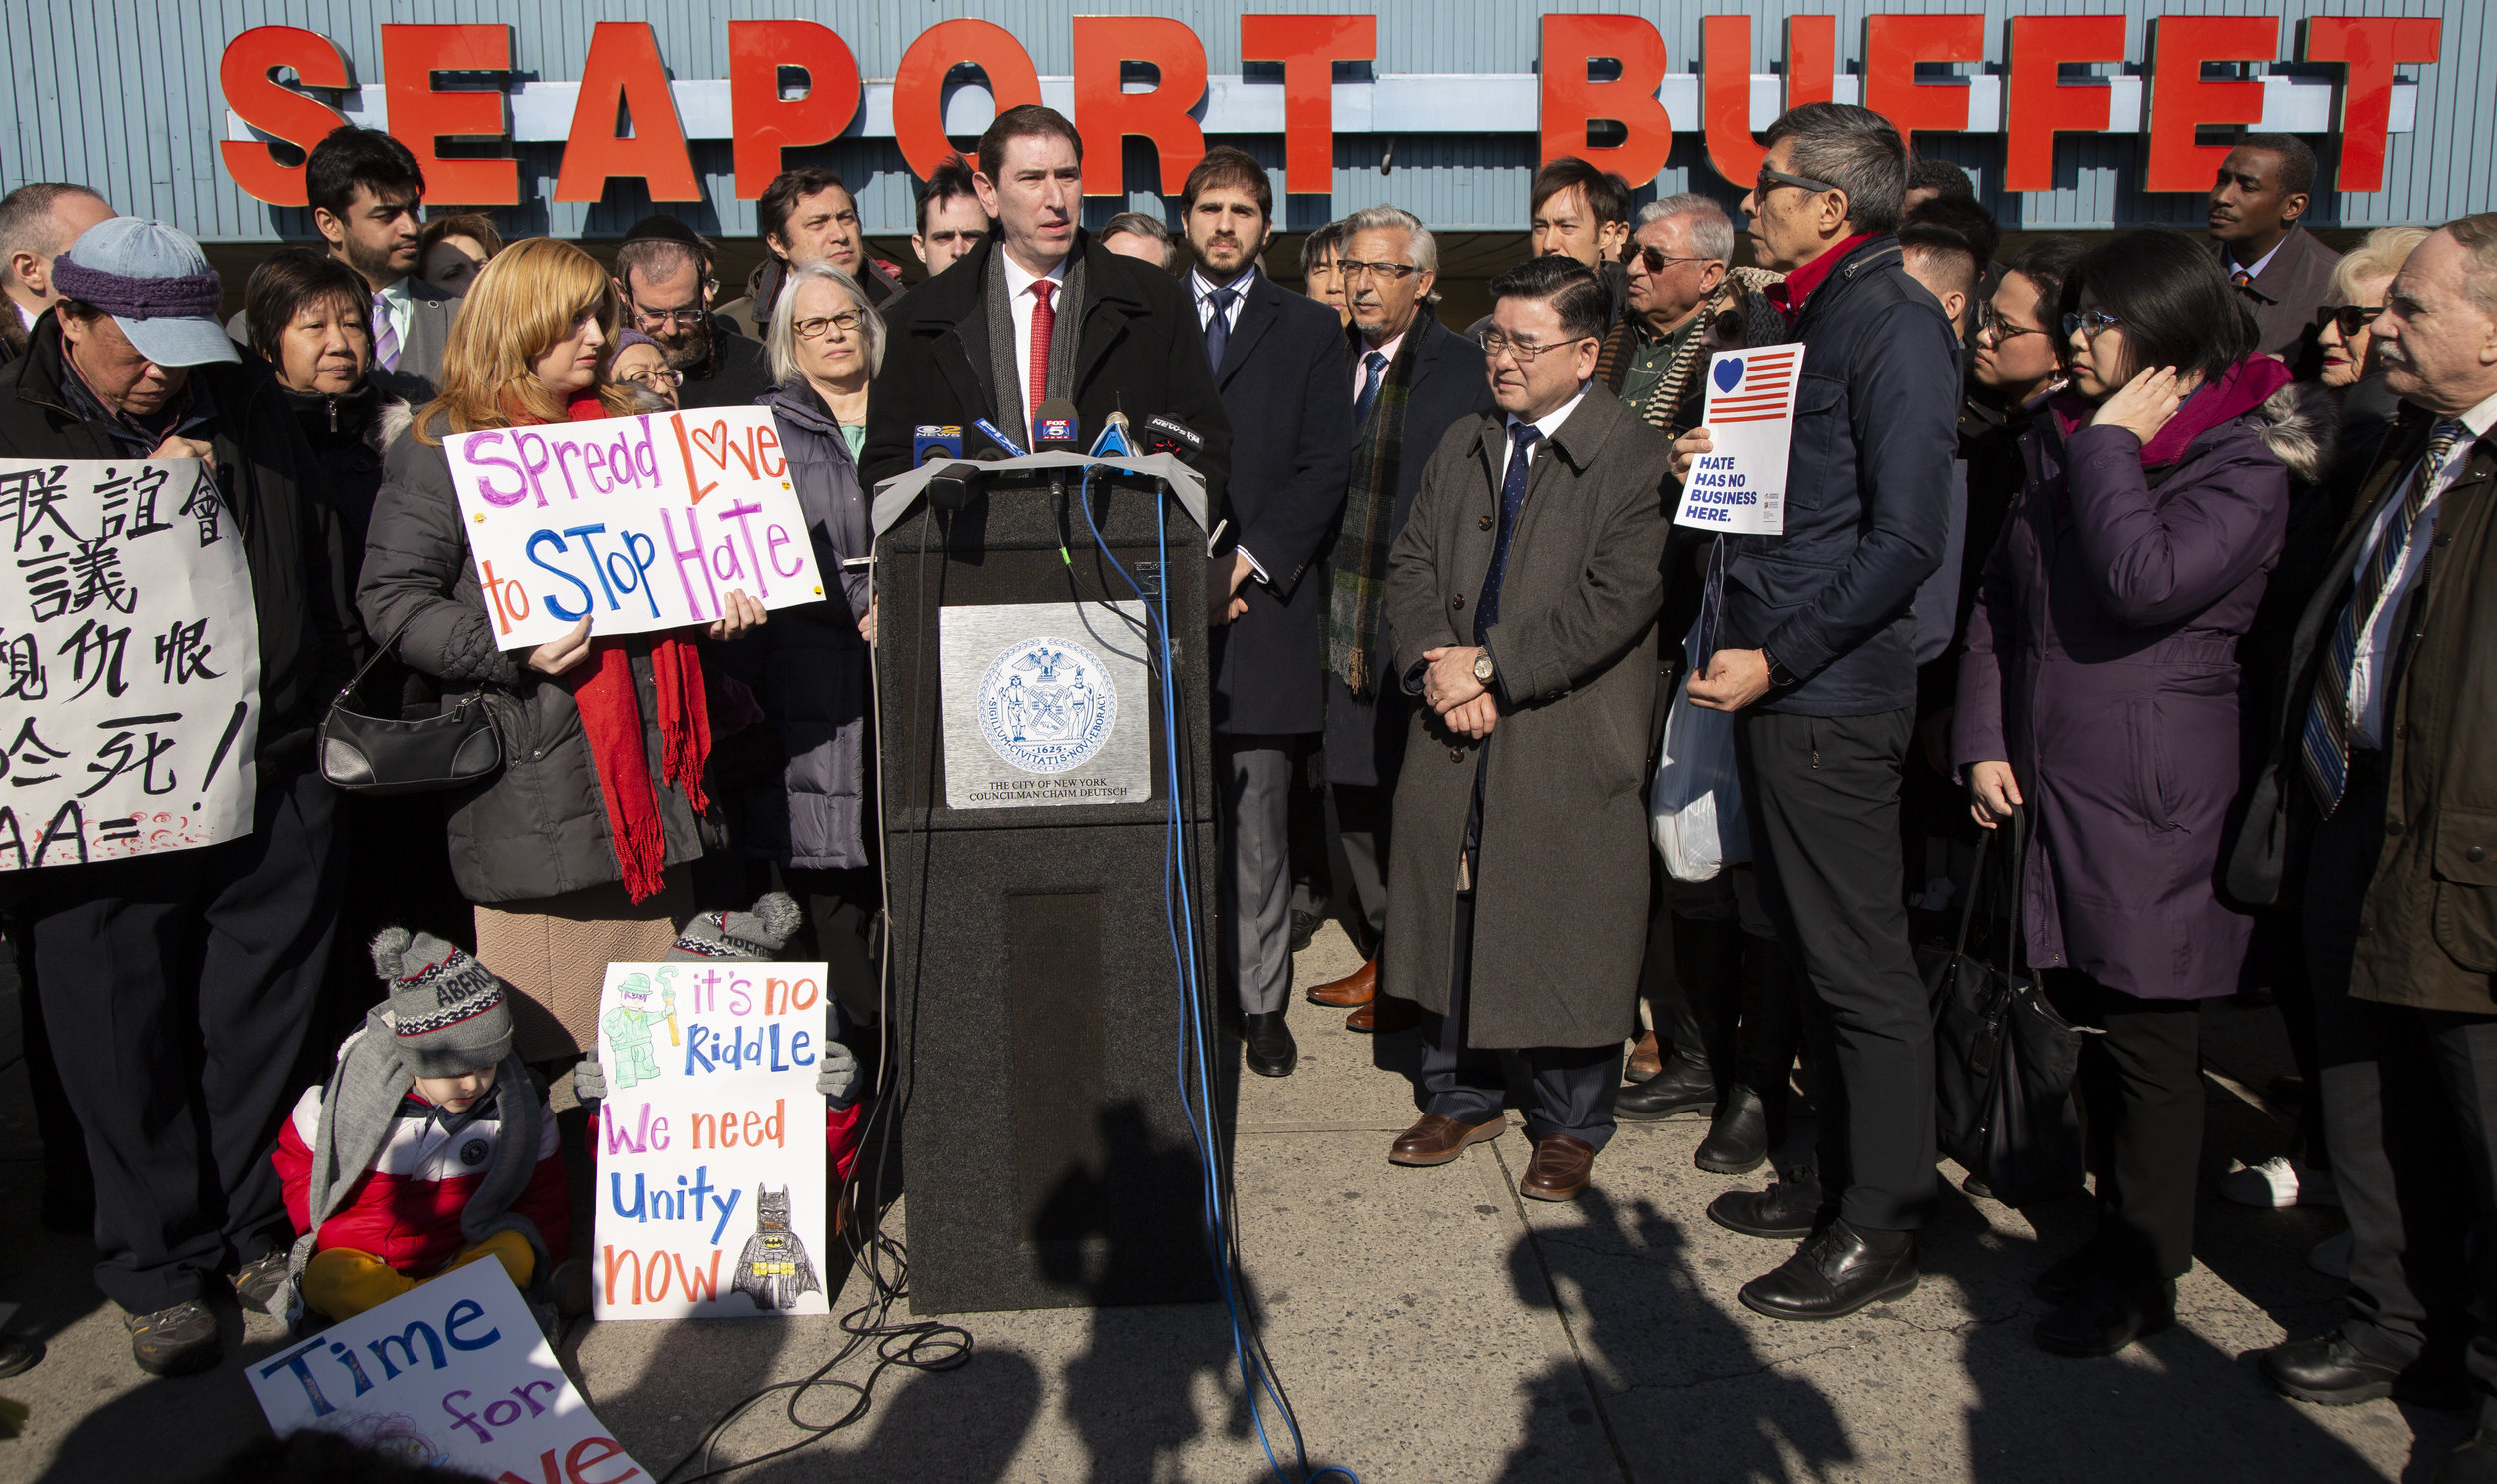 City Council Member Chaim Deutsch Holds Press Conference Denouncing Hate In Wake Of Seaport Buffet Attack